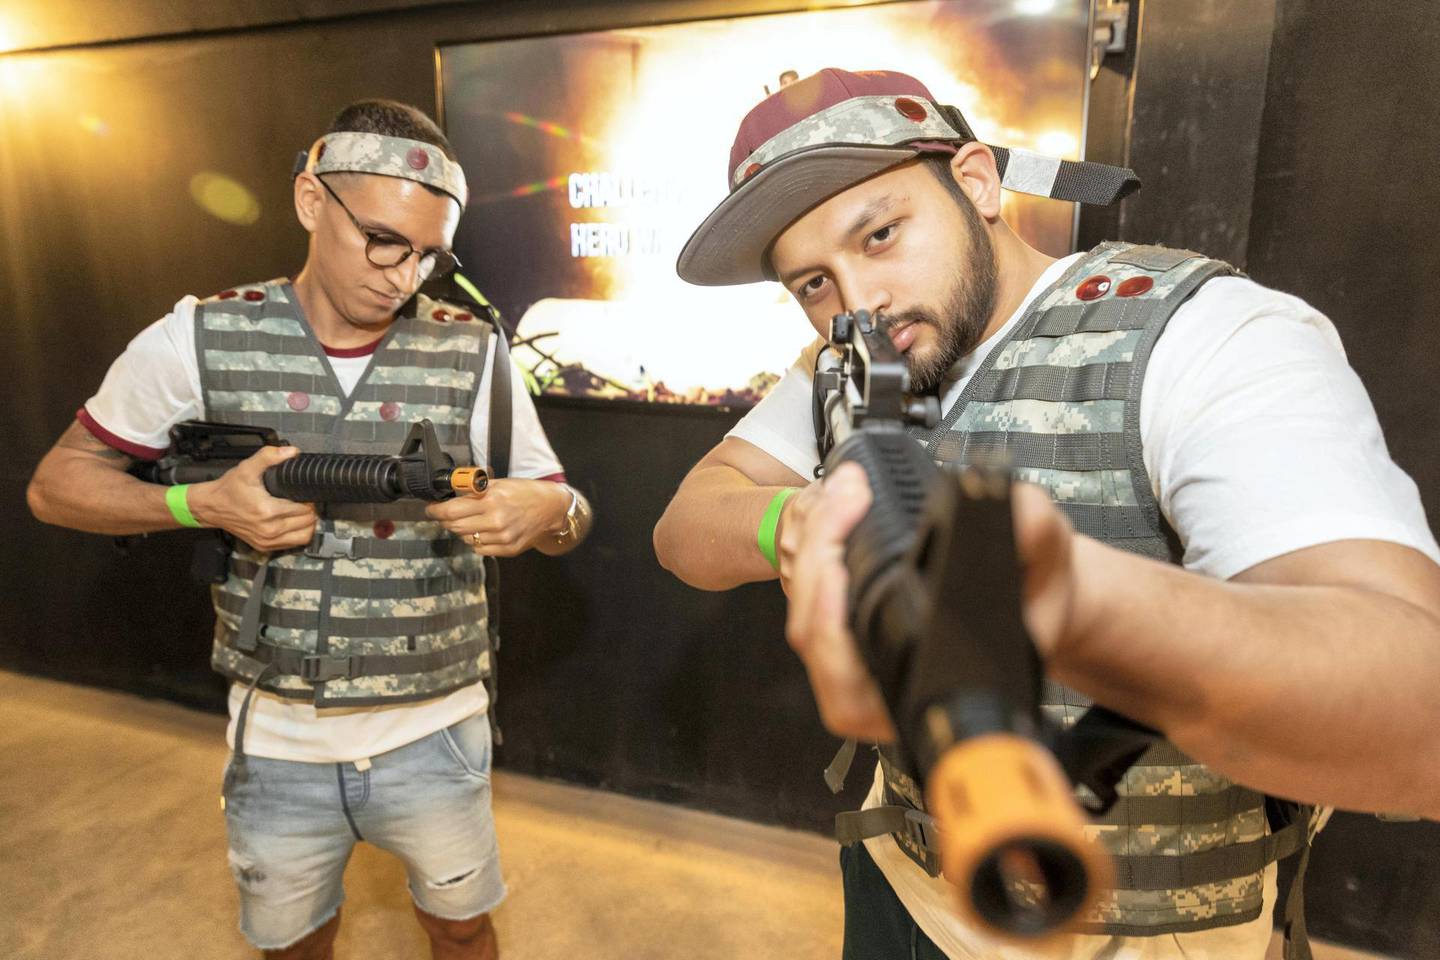 DUBAI, UNITED ARAB EMIRATES. 14 DECEMBER 2019. A first look at XStrike, a new entertainment concept launching in Dubai, which features live combat simulationand and promotes teamwork while providing entertainment through innovative new technology. Participants take part in a urban assault course style gun battle using laser based toy guns. With participants for the first game geared up they wait for the first assault. (Photo: Antonie Robertson/The National) Journalist: Hafsa Lodi. Section: National.